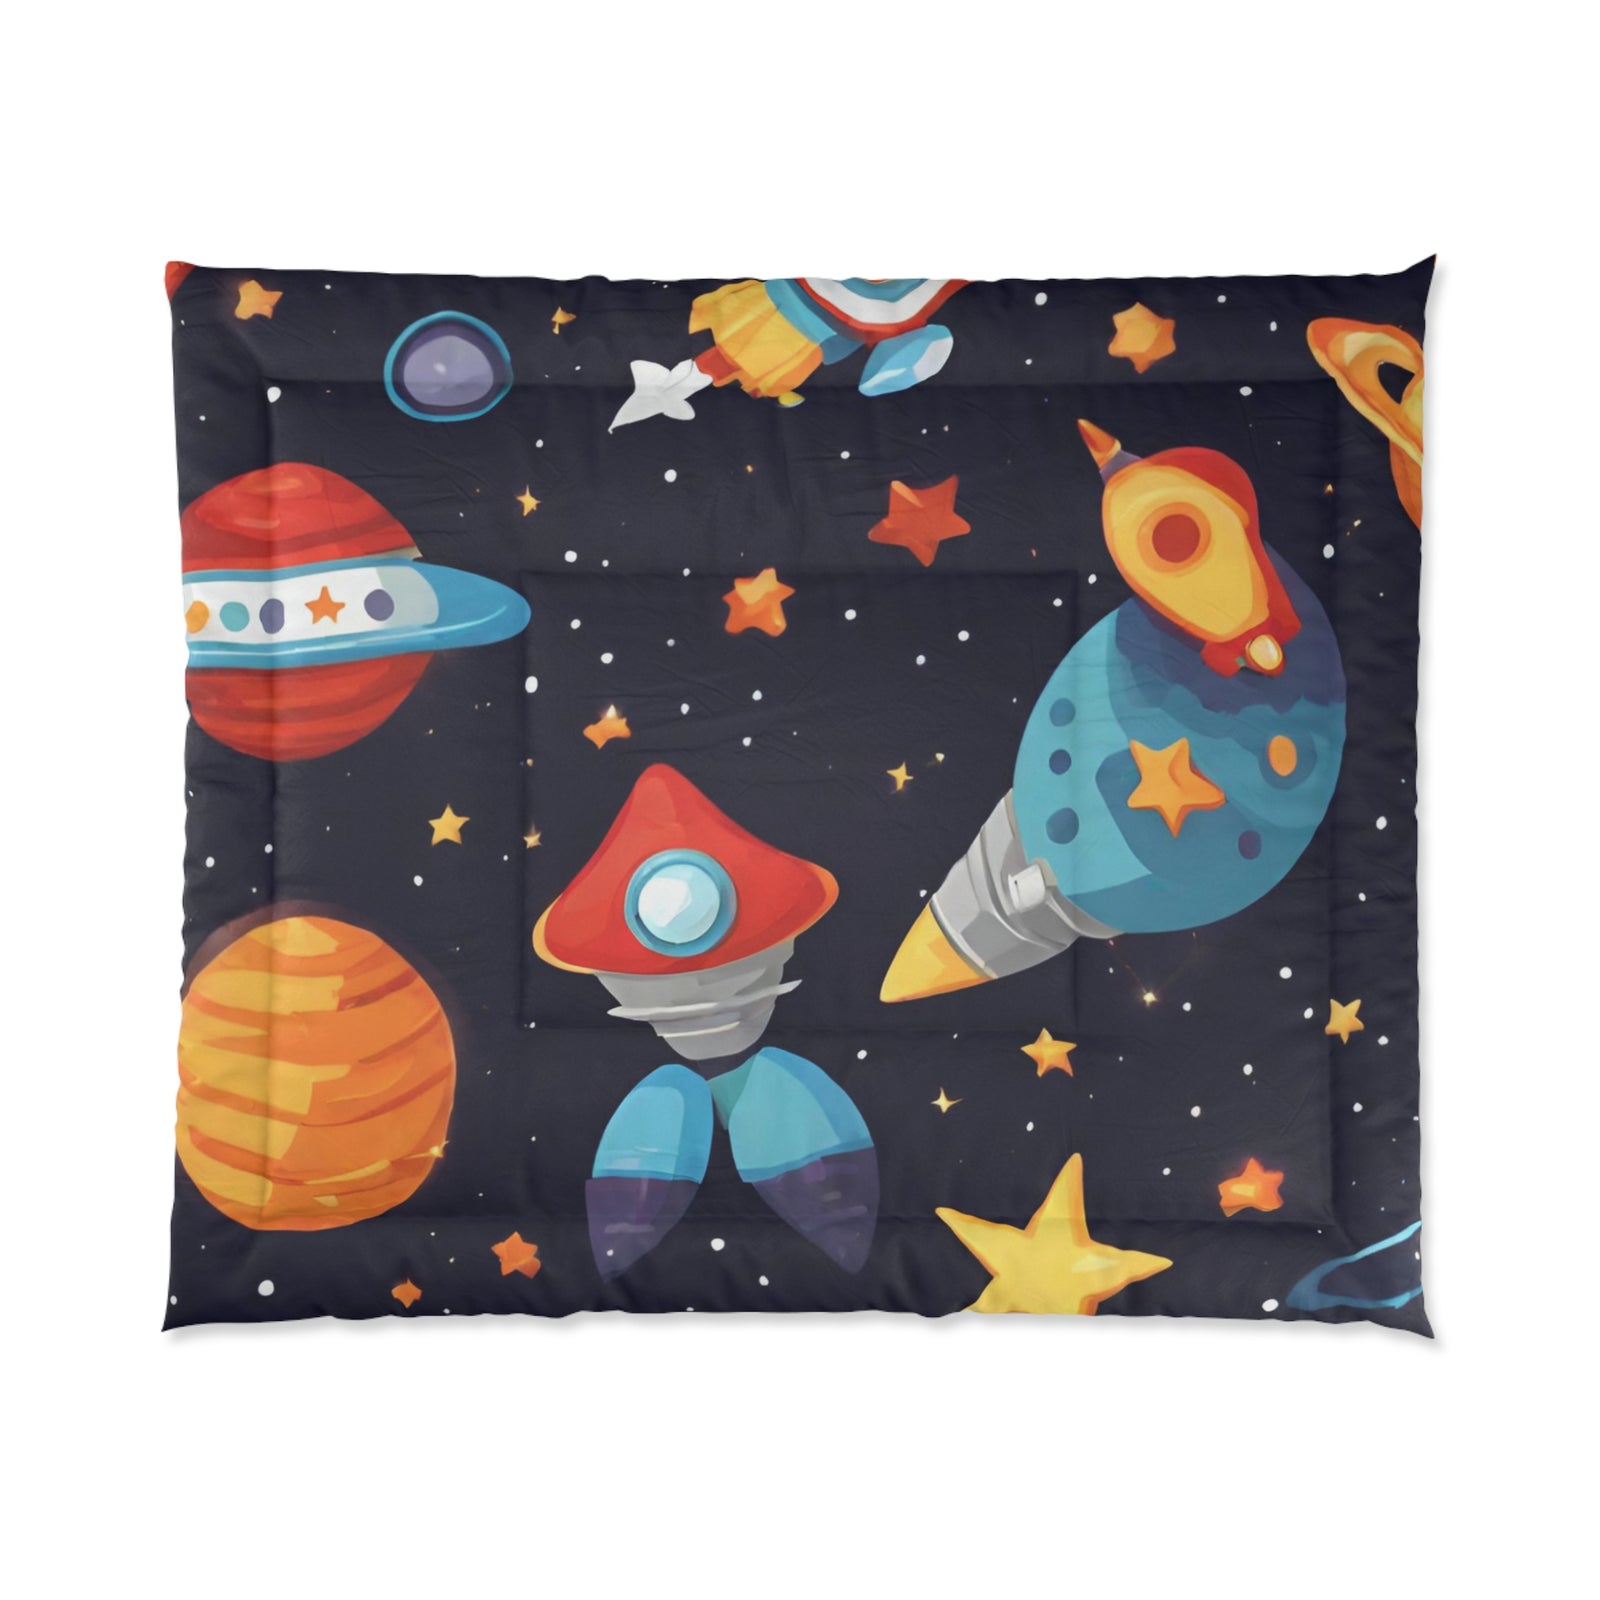 Galactic Dreams Comforter: Whimsical Stars, Sky, Galaxy Spaceships, and Fun Imagery for Kids